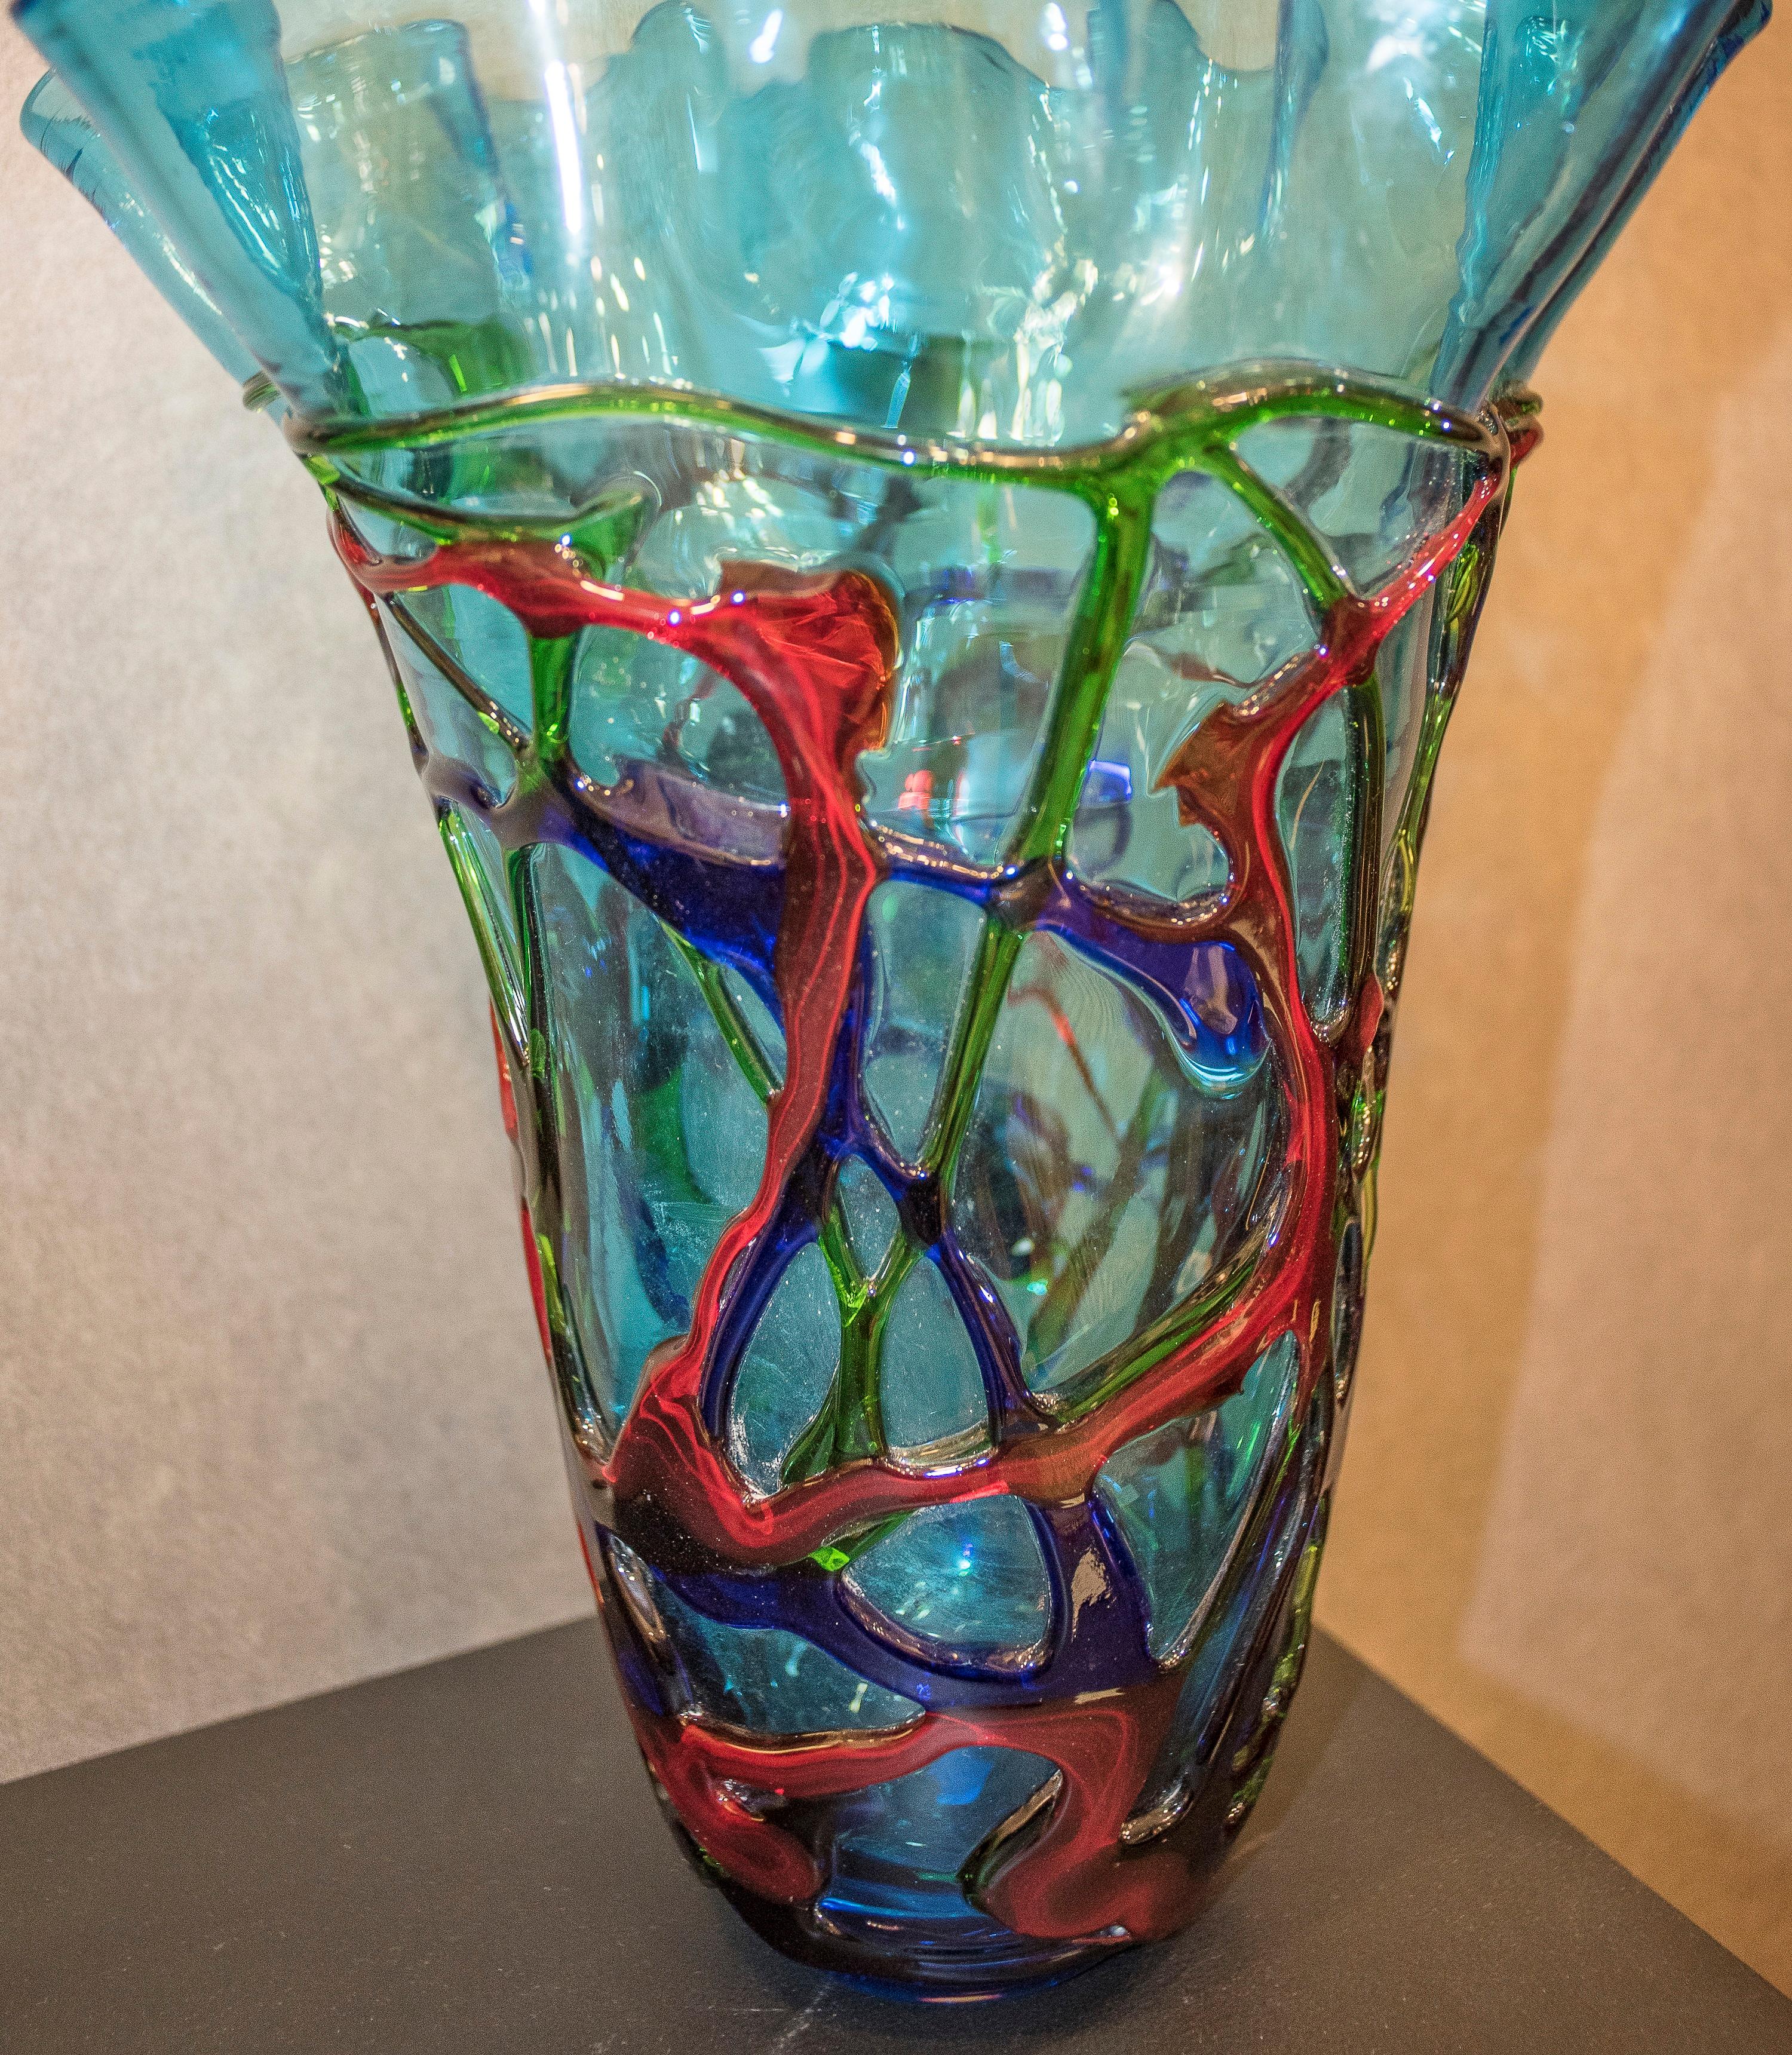 Stunning green, blue and red crystal vase by Murano Italy, midcentury 1970s.
It's in a perfect condition. It comes from a private North Italian collection. Is a unique piece.
Suitable in any corner or room giving a glamorous and sophisticated